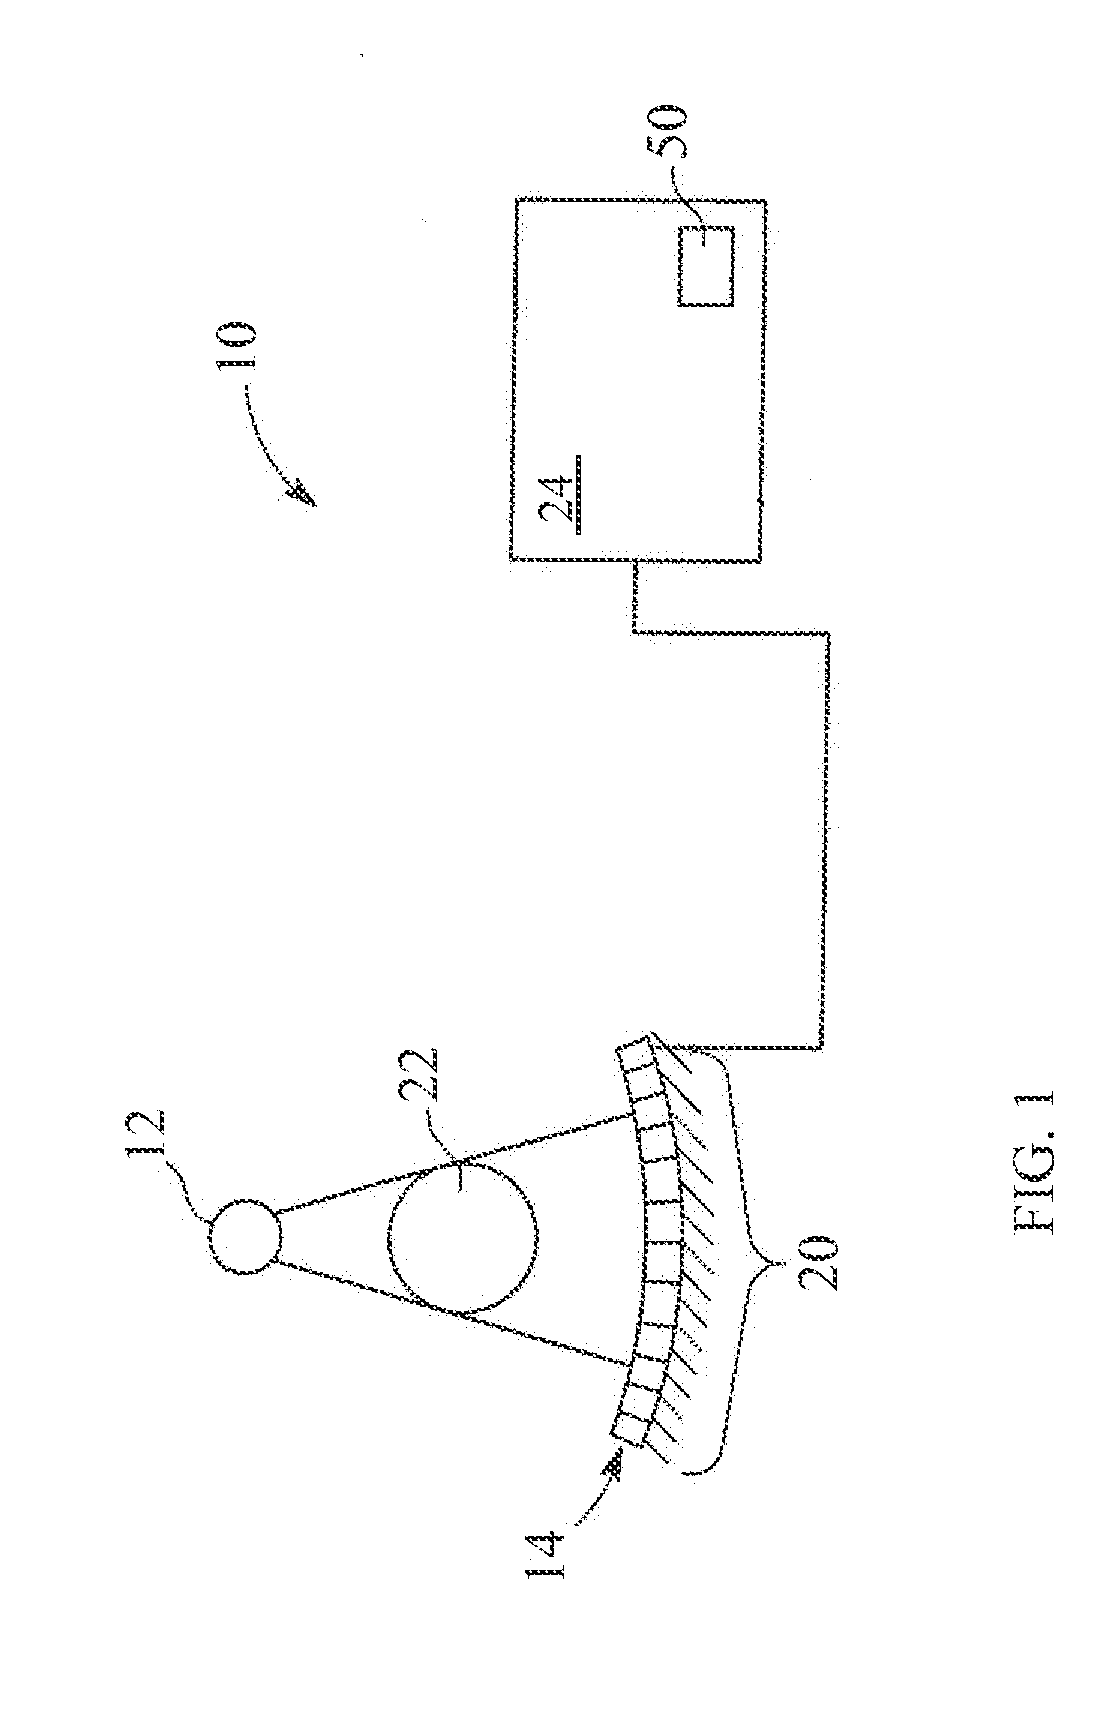 Methods and systems for performing model-based iterative reconstruction